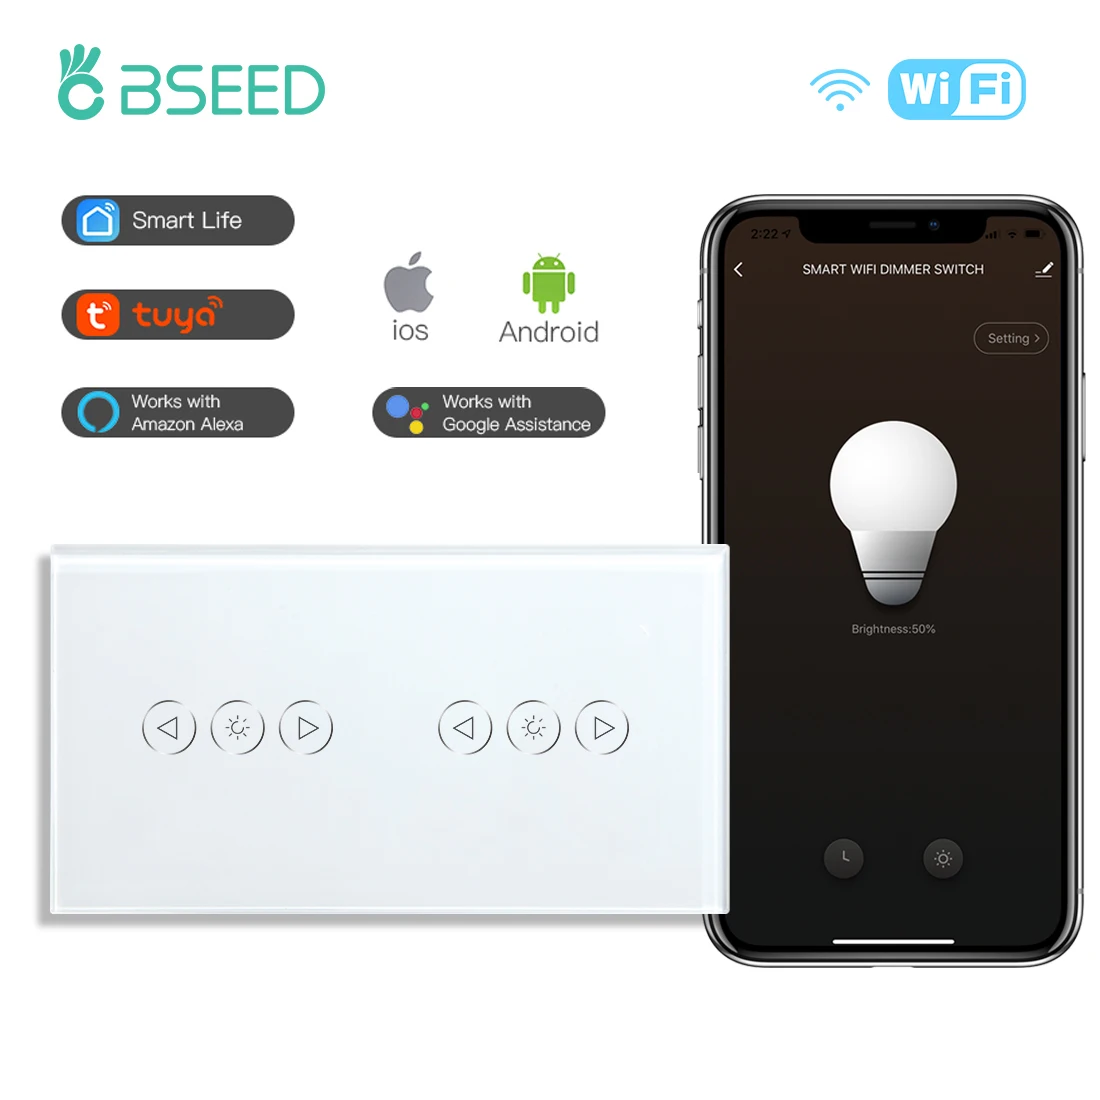 Bseed WIFI Dimmer Switch Double Wall Touch Switch Smart Dimmable Crystal Panel White Black Golden Wireless Smart Life TUYA App